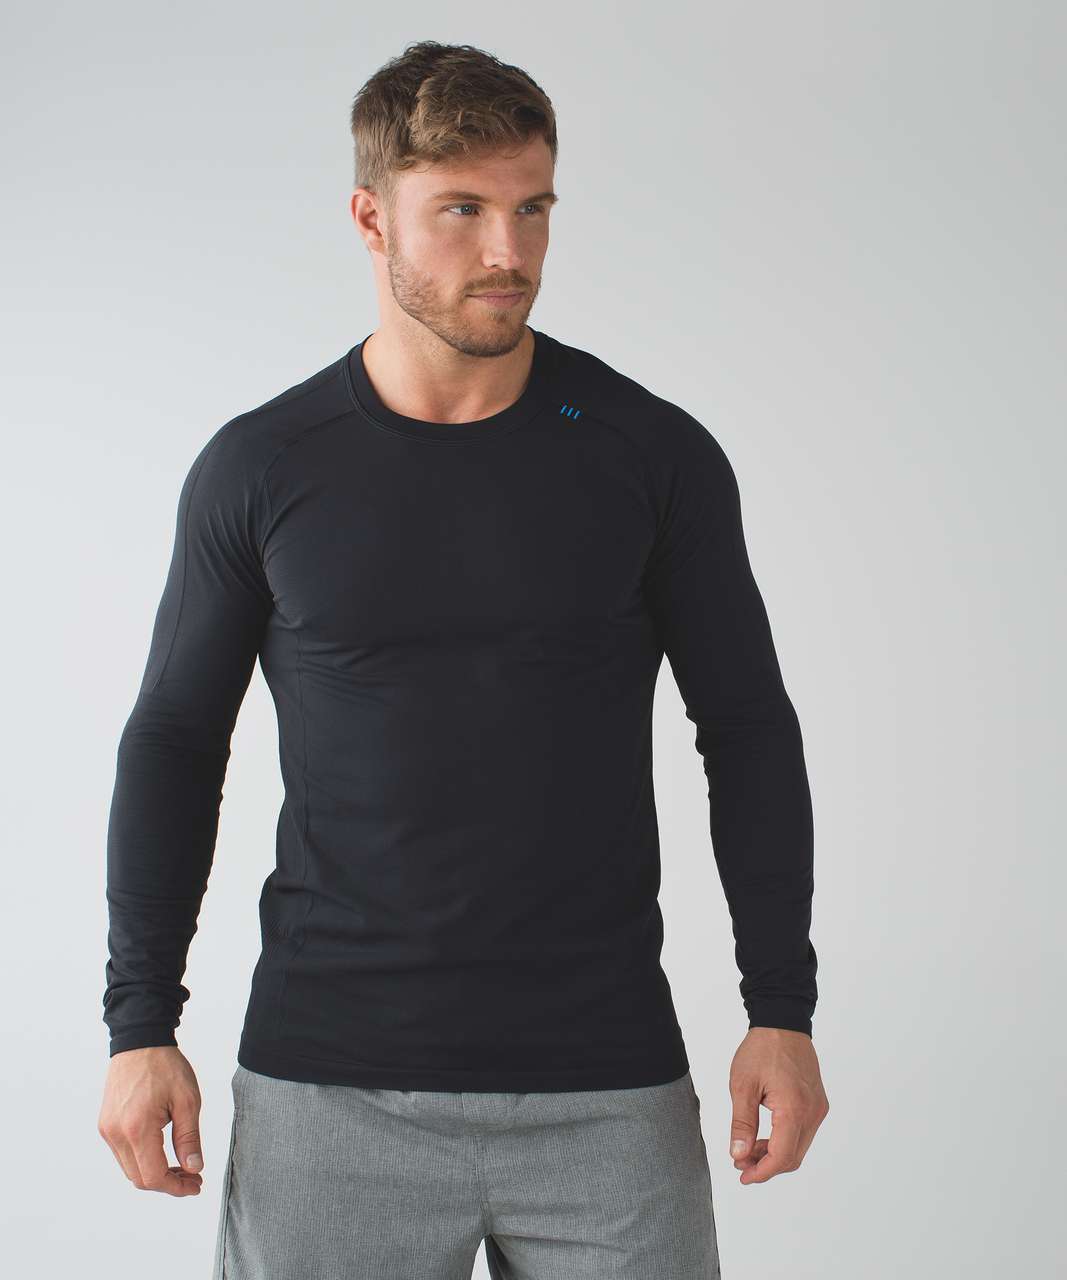 Lululemon Metal Vent Tech Thermal Crew - Black (First Release)